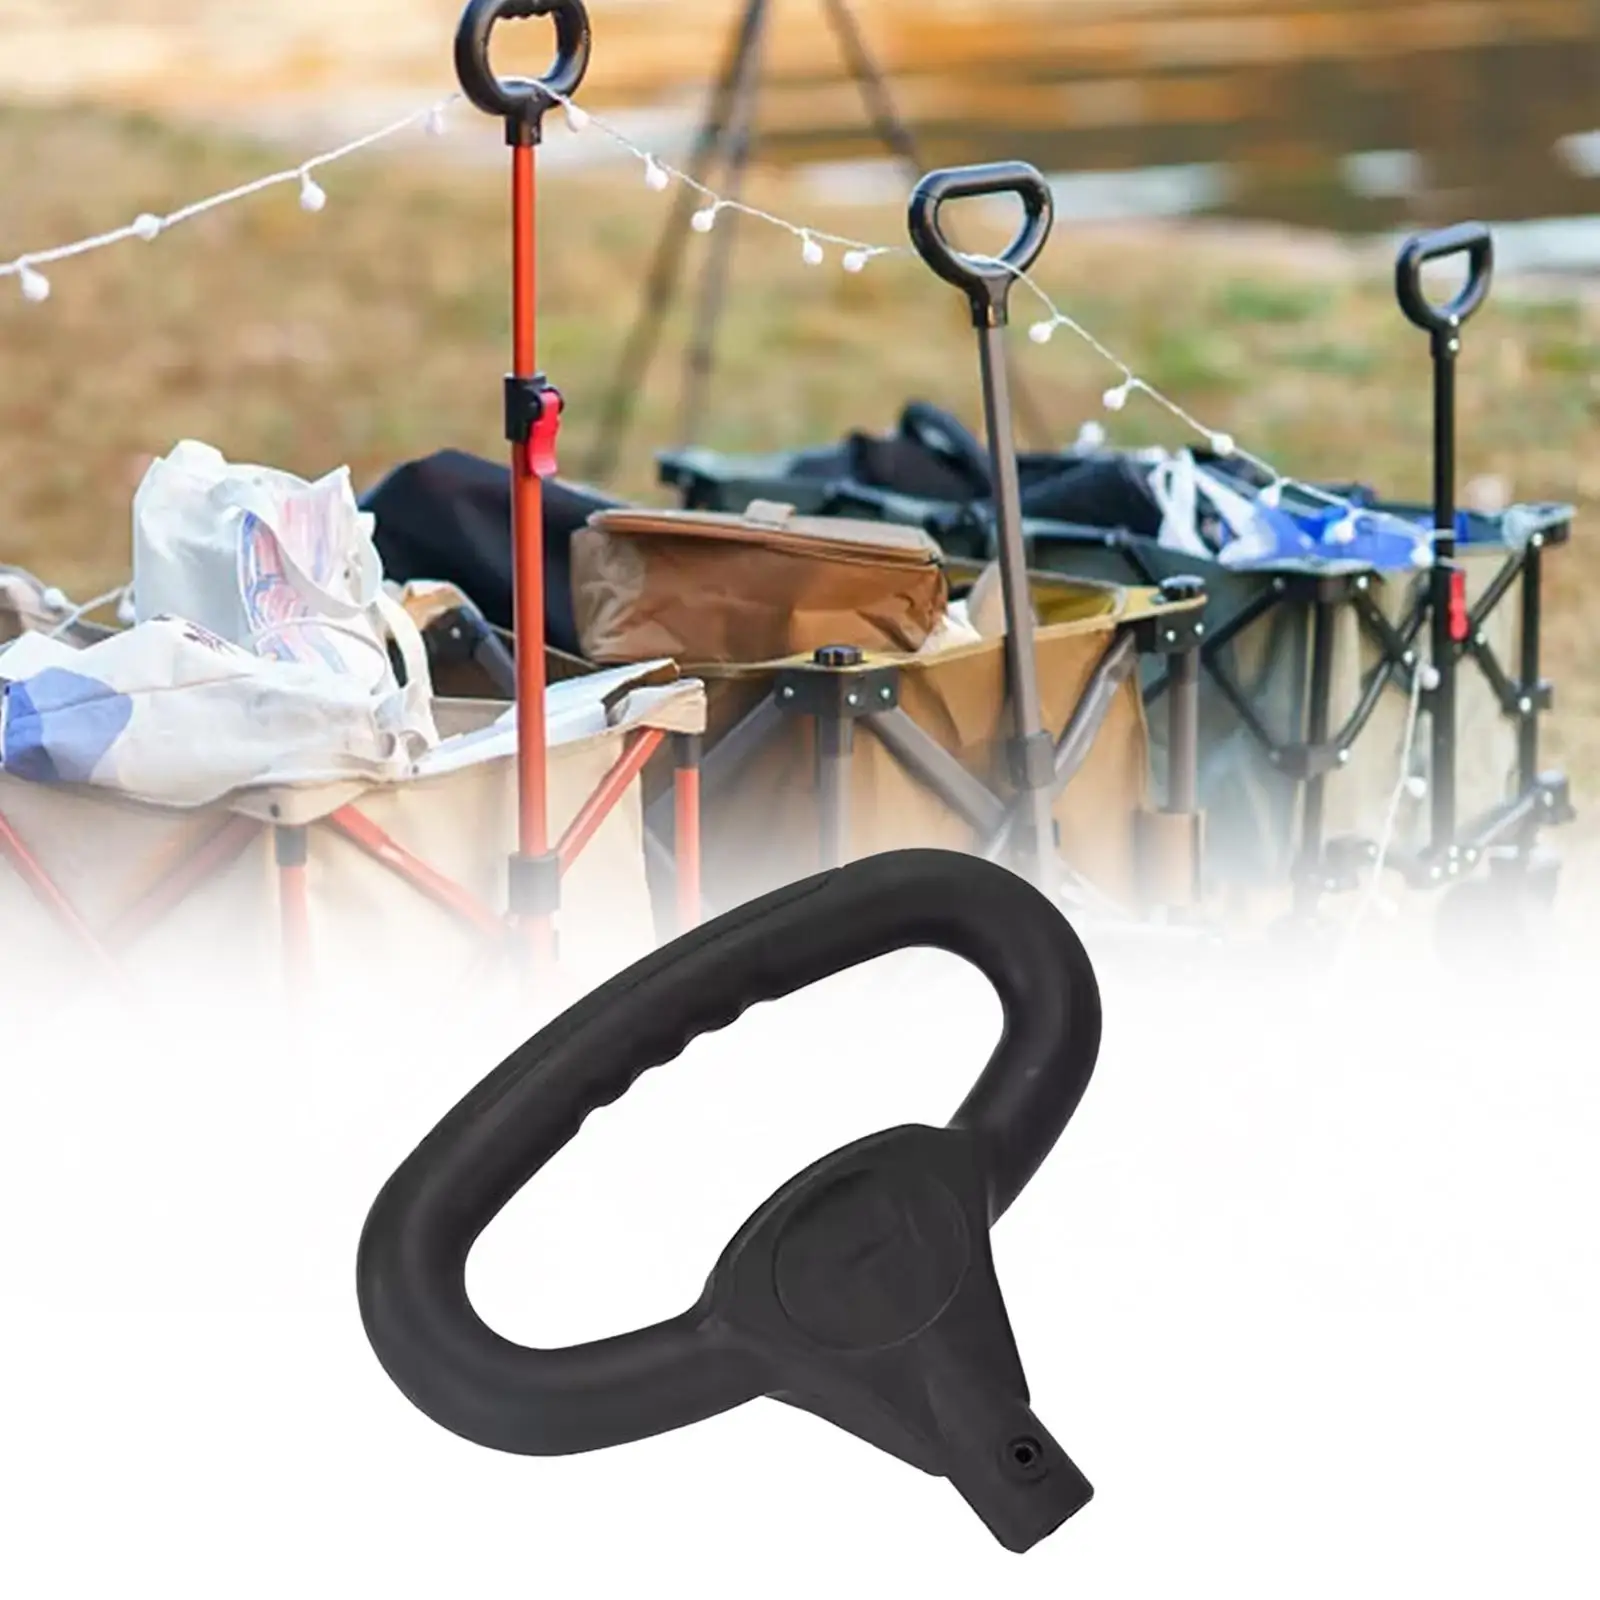 Wagon Cart Push Handle, Trolley Handle, Portable Black Spare Part, Replacement Accessories for Garden Shopping Cart